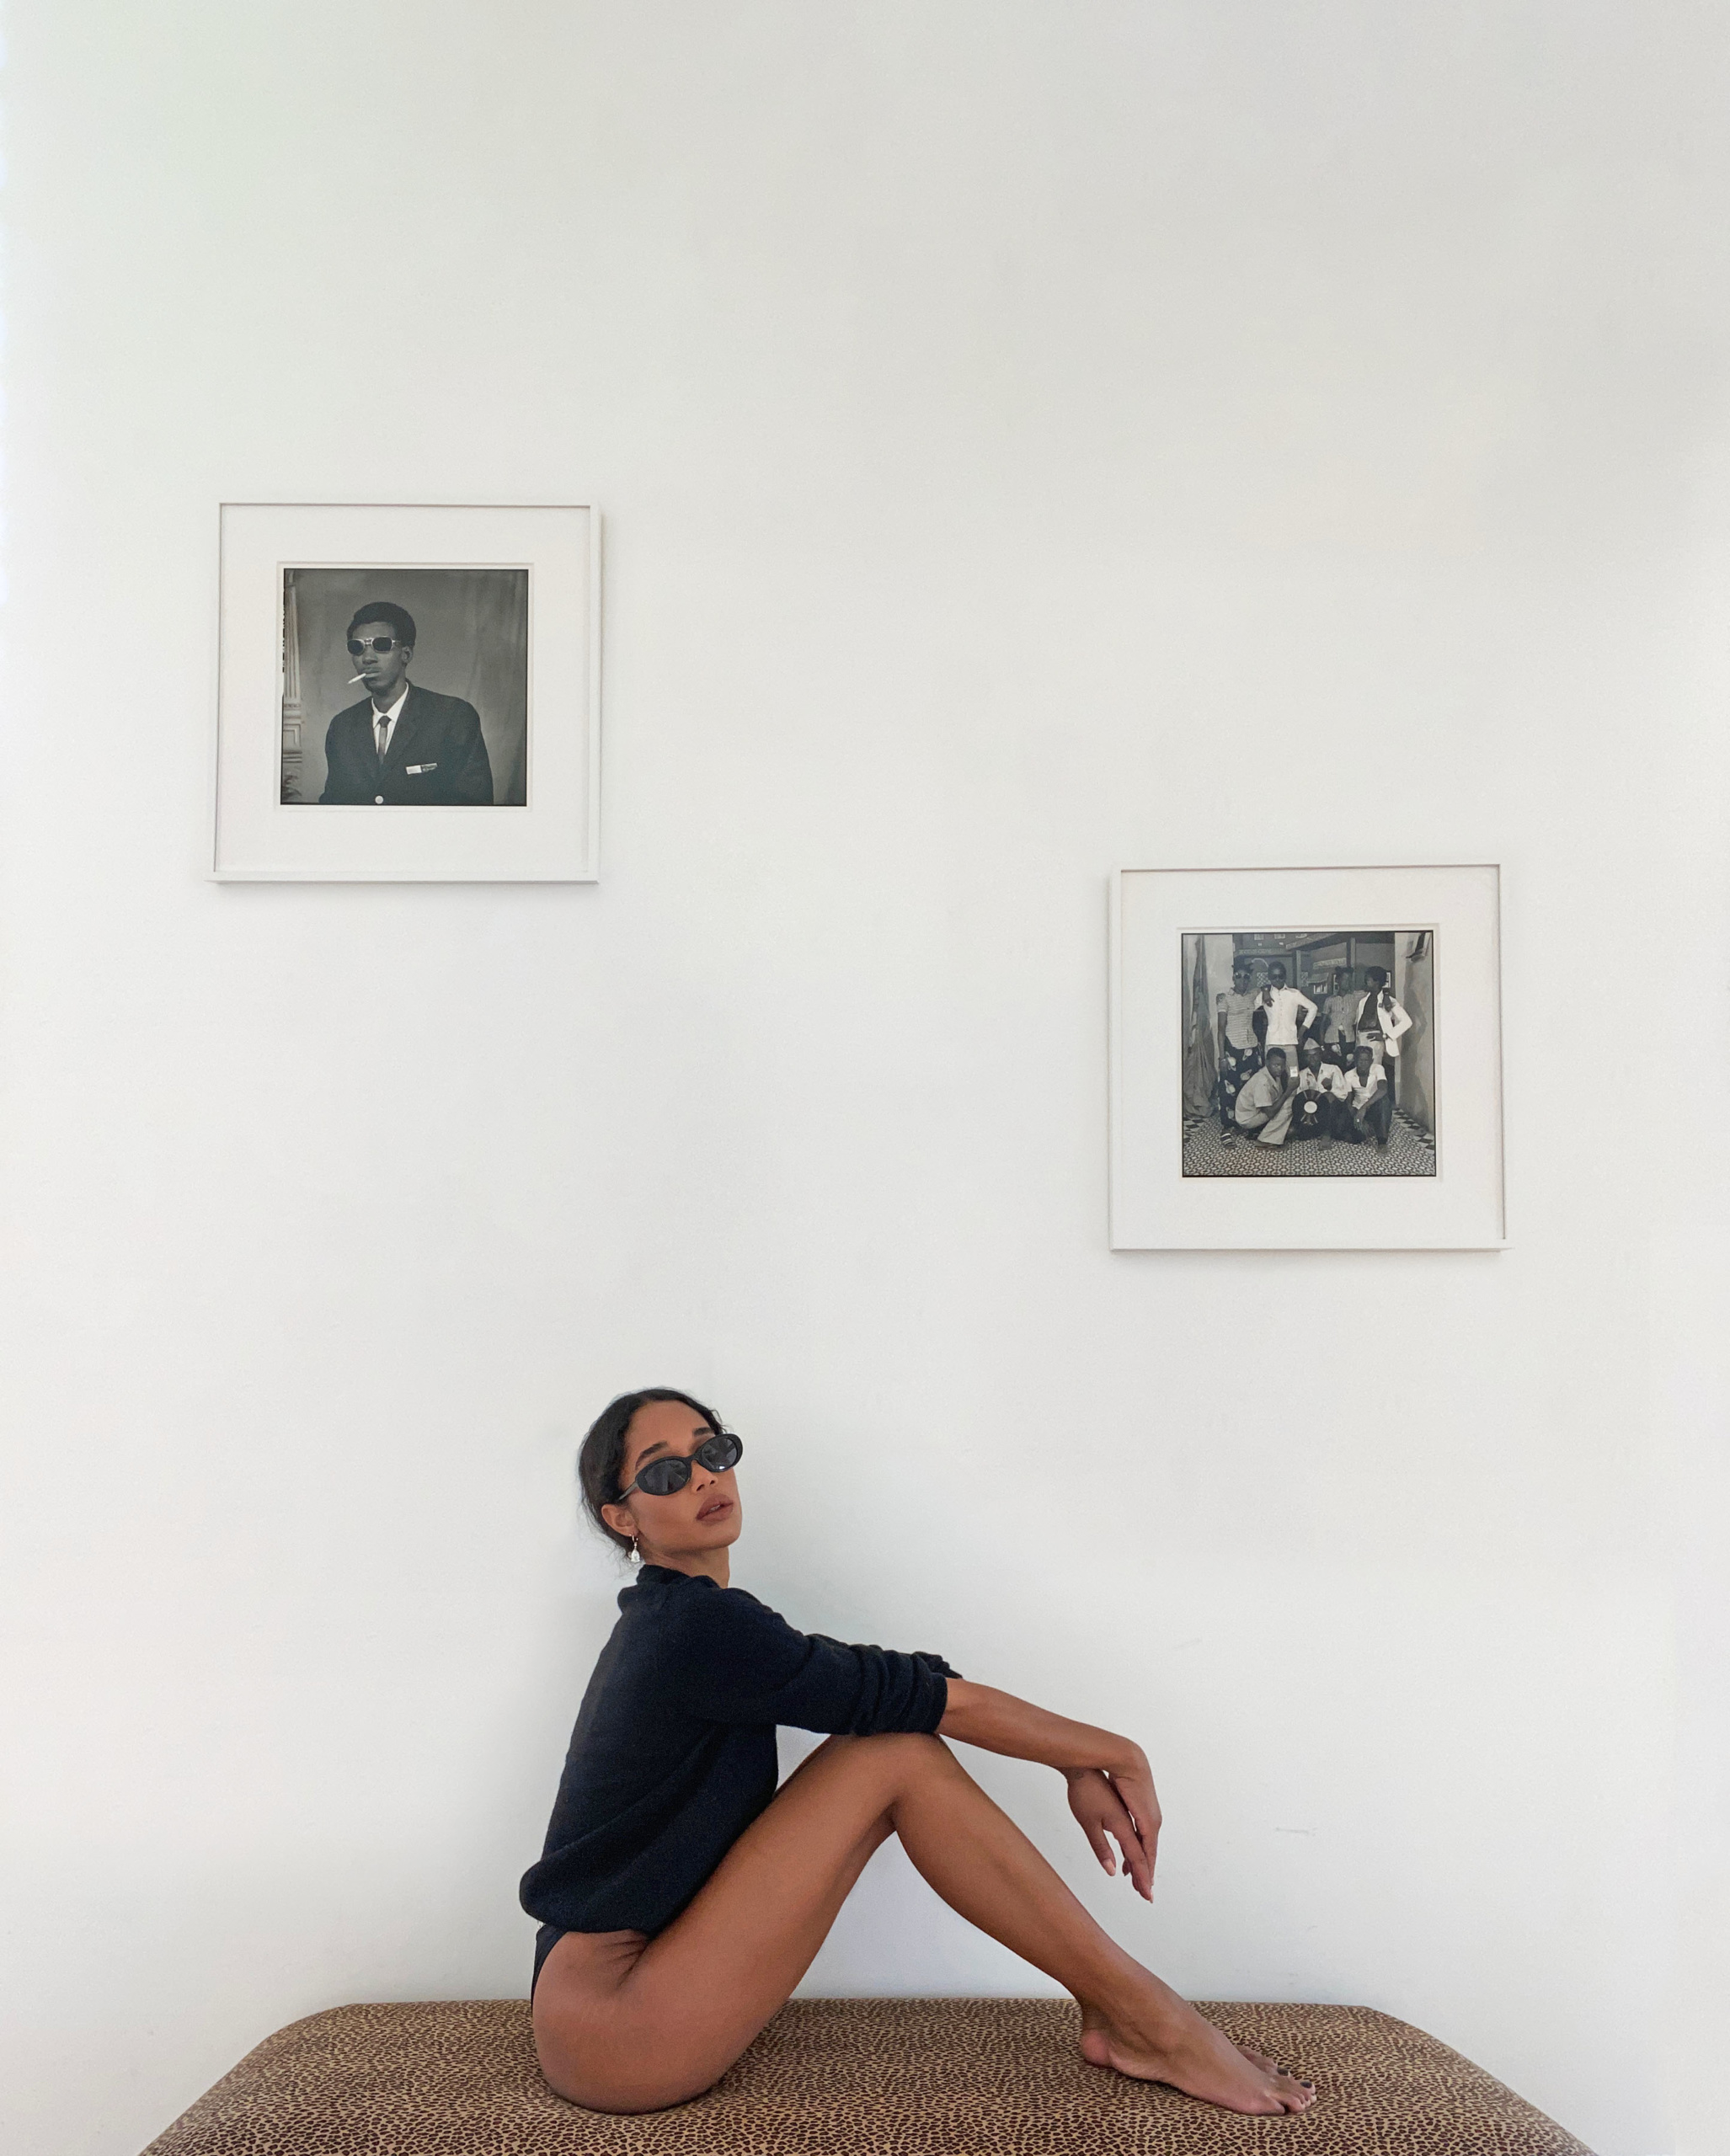 Harrier with her photographs by Sory Sanlé. Harrier wears an Éric Bompard cardigan and glasses by The Row for Oliver Peoples. Portrait by Harrier styled by Danielle Nachmani Goldberg.